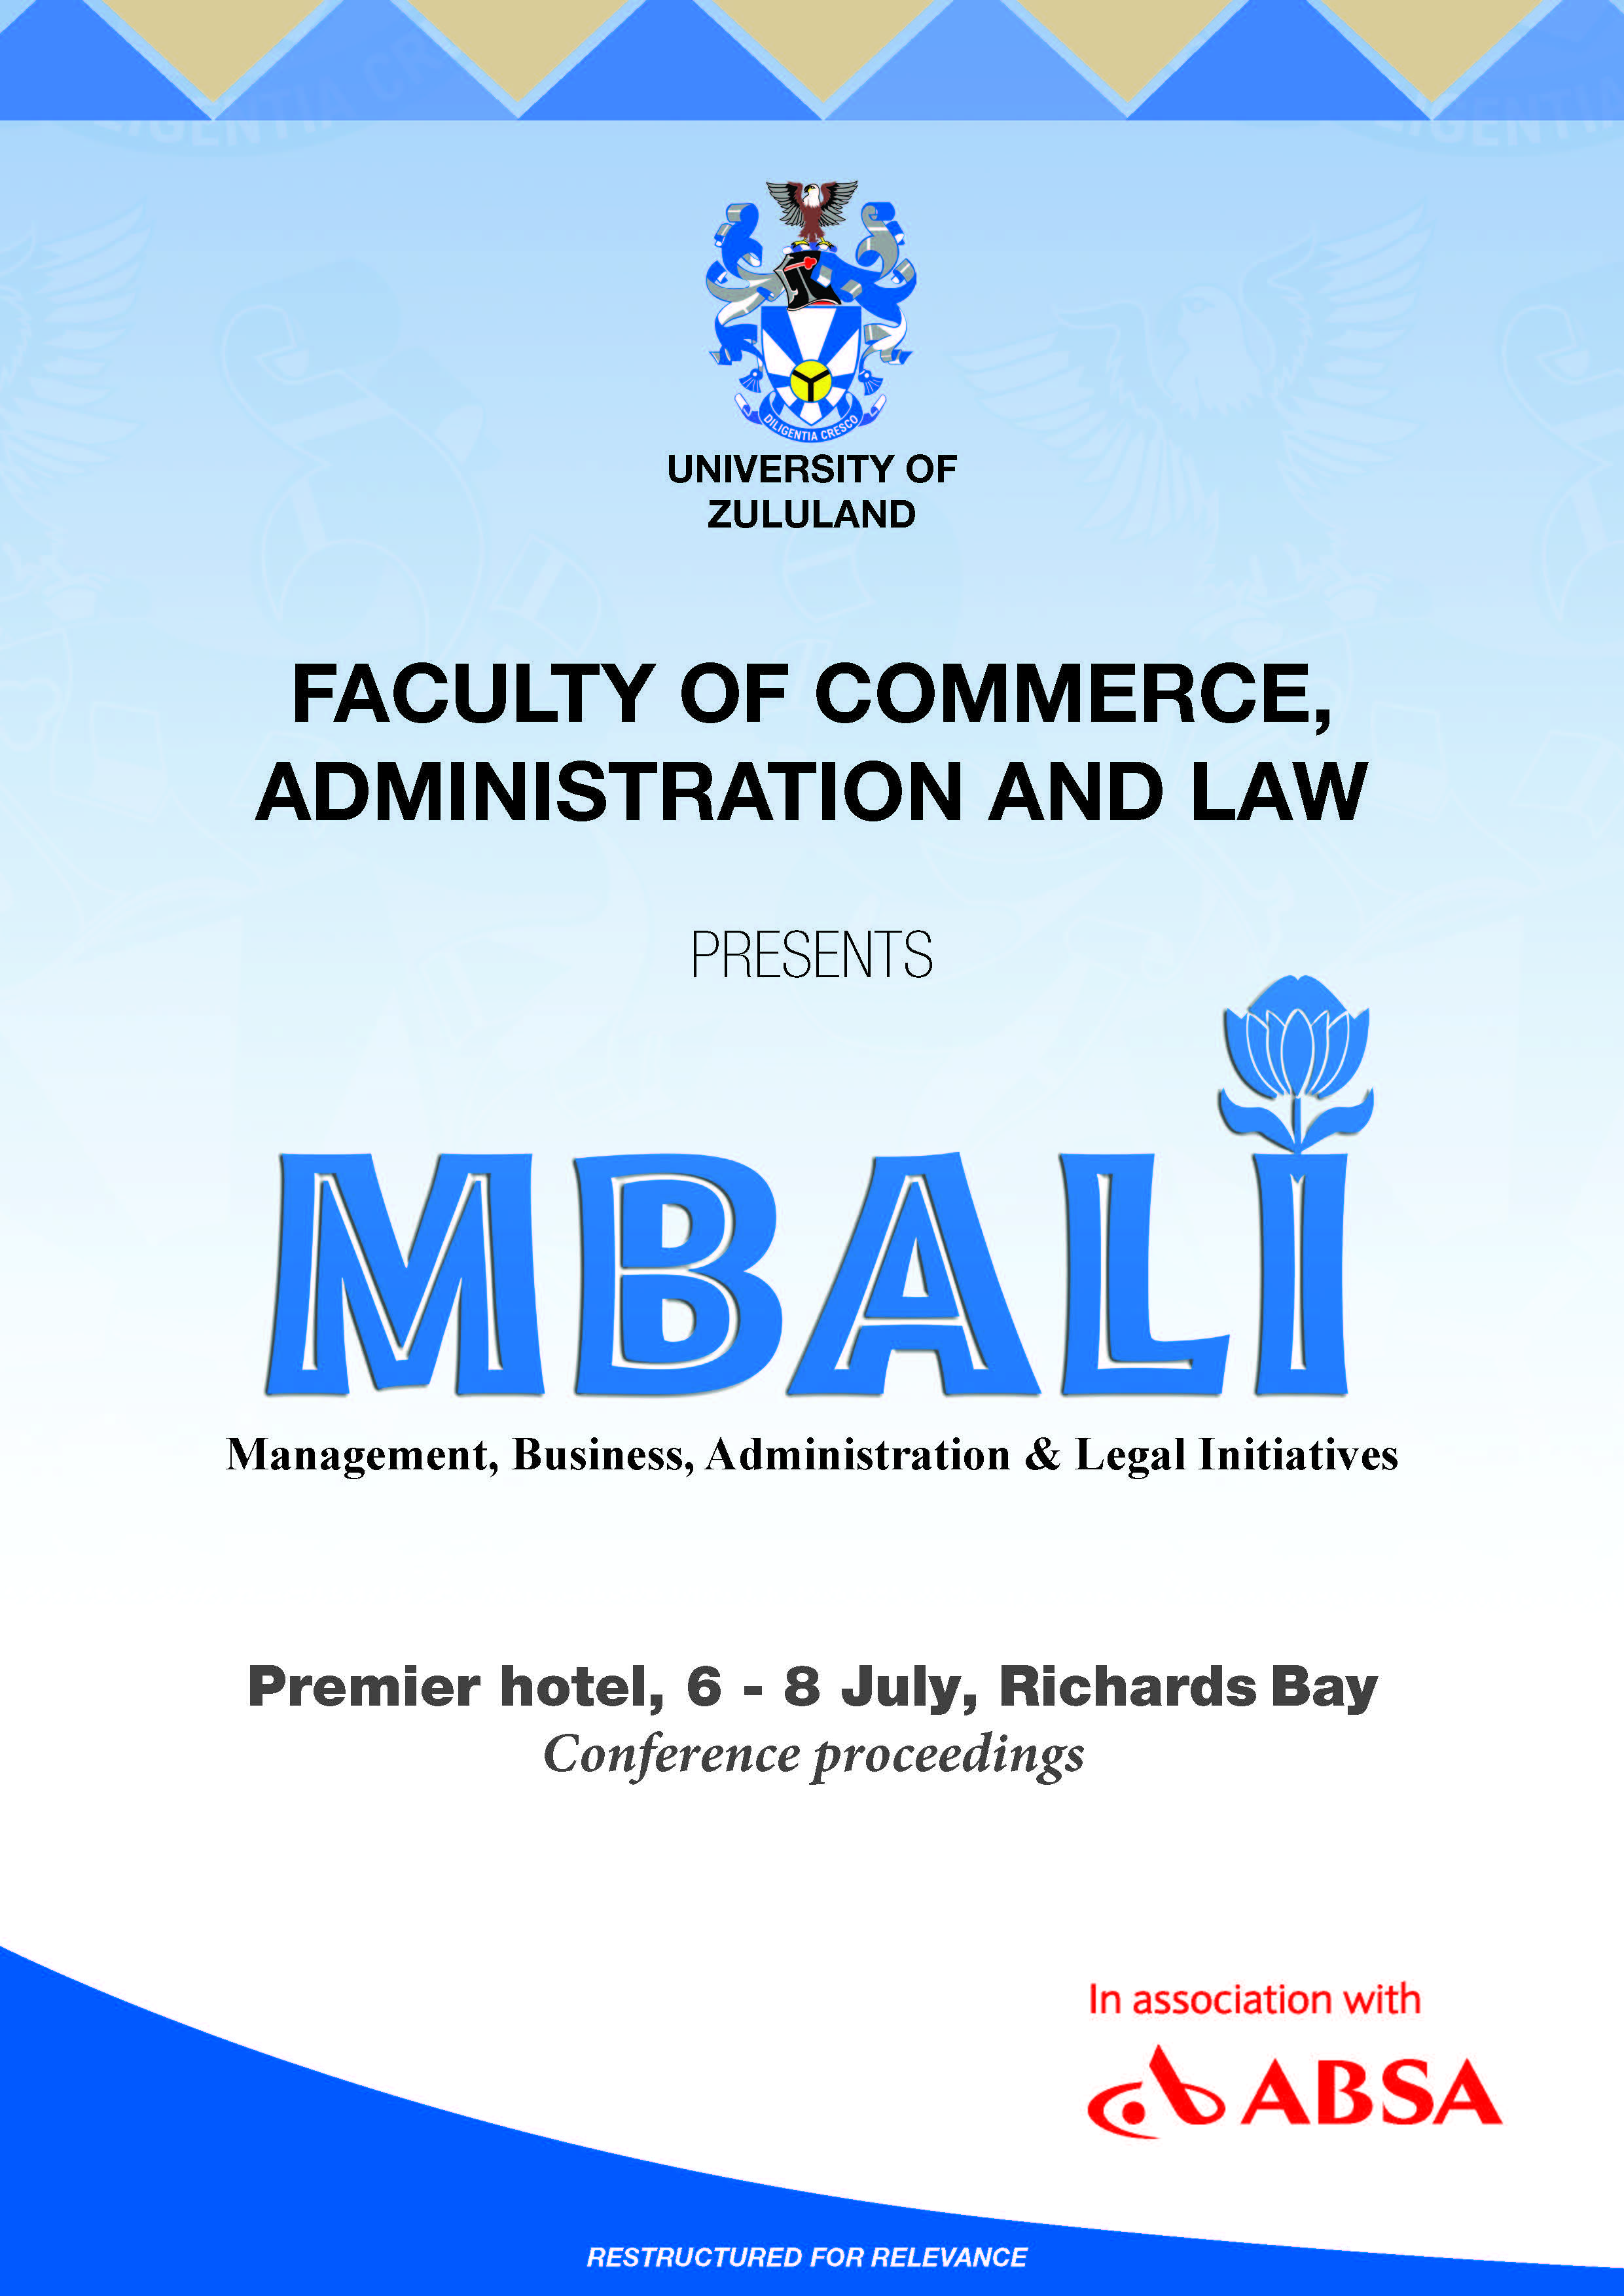 Mbali conference proceedings_Page_001